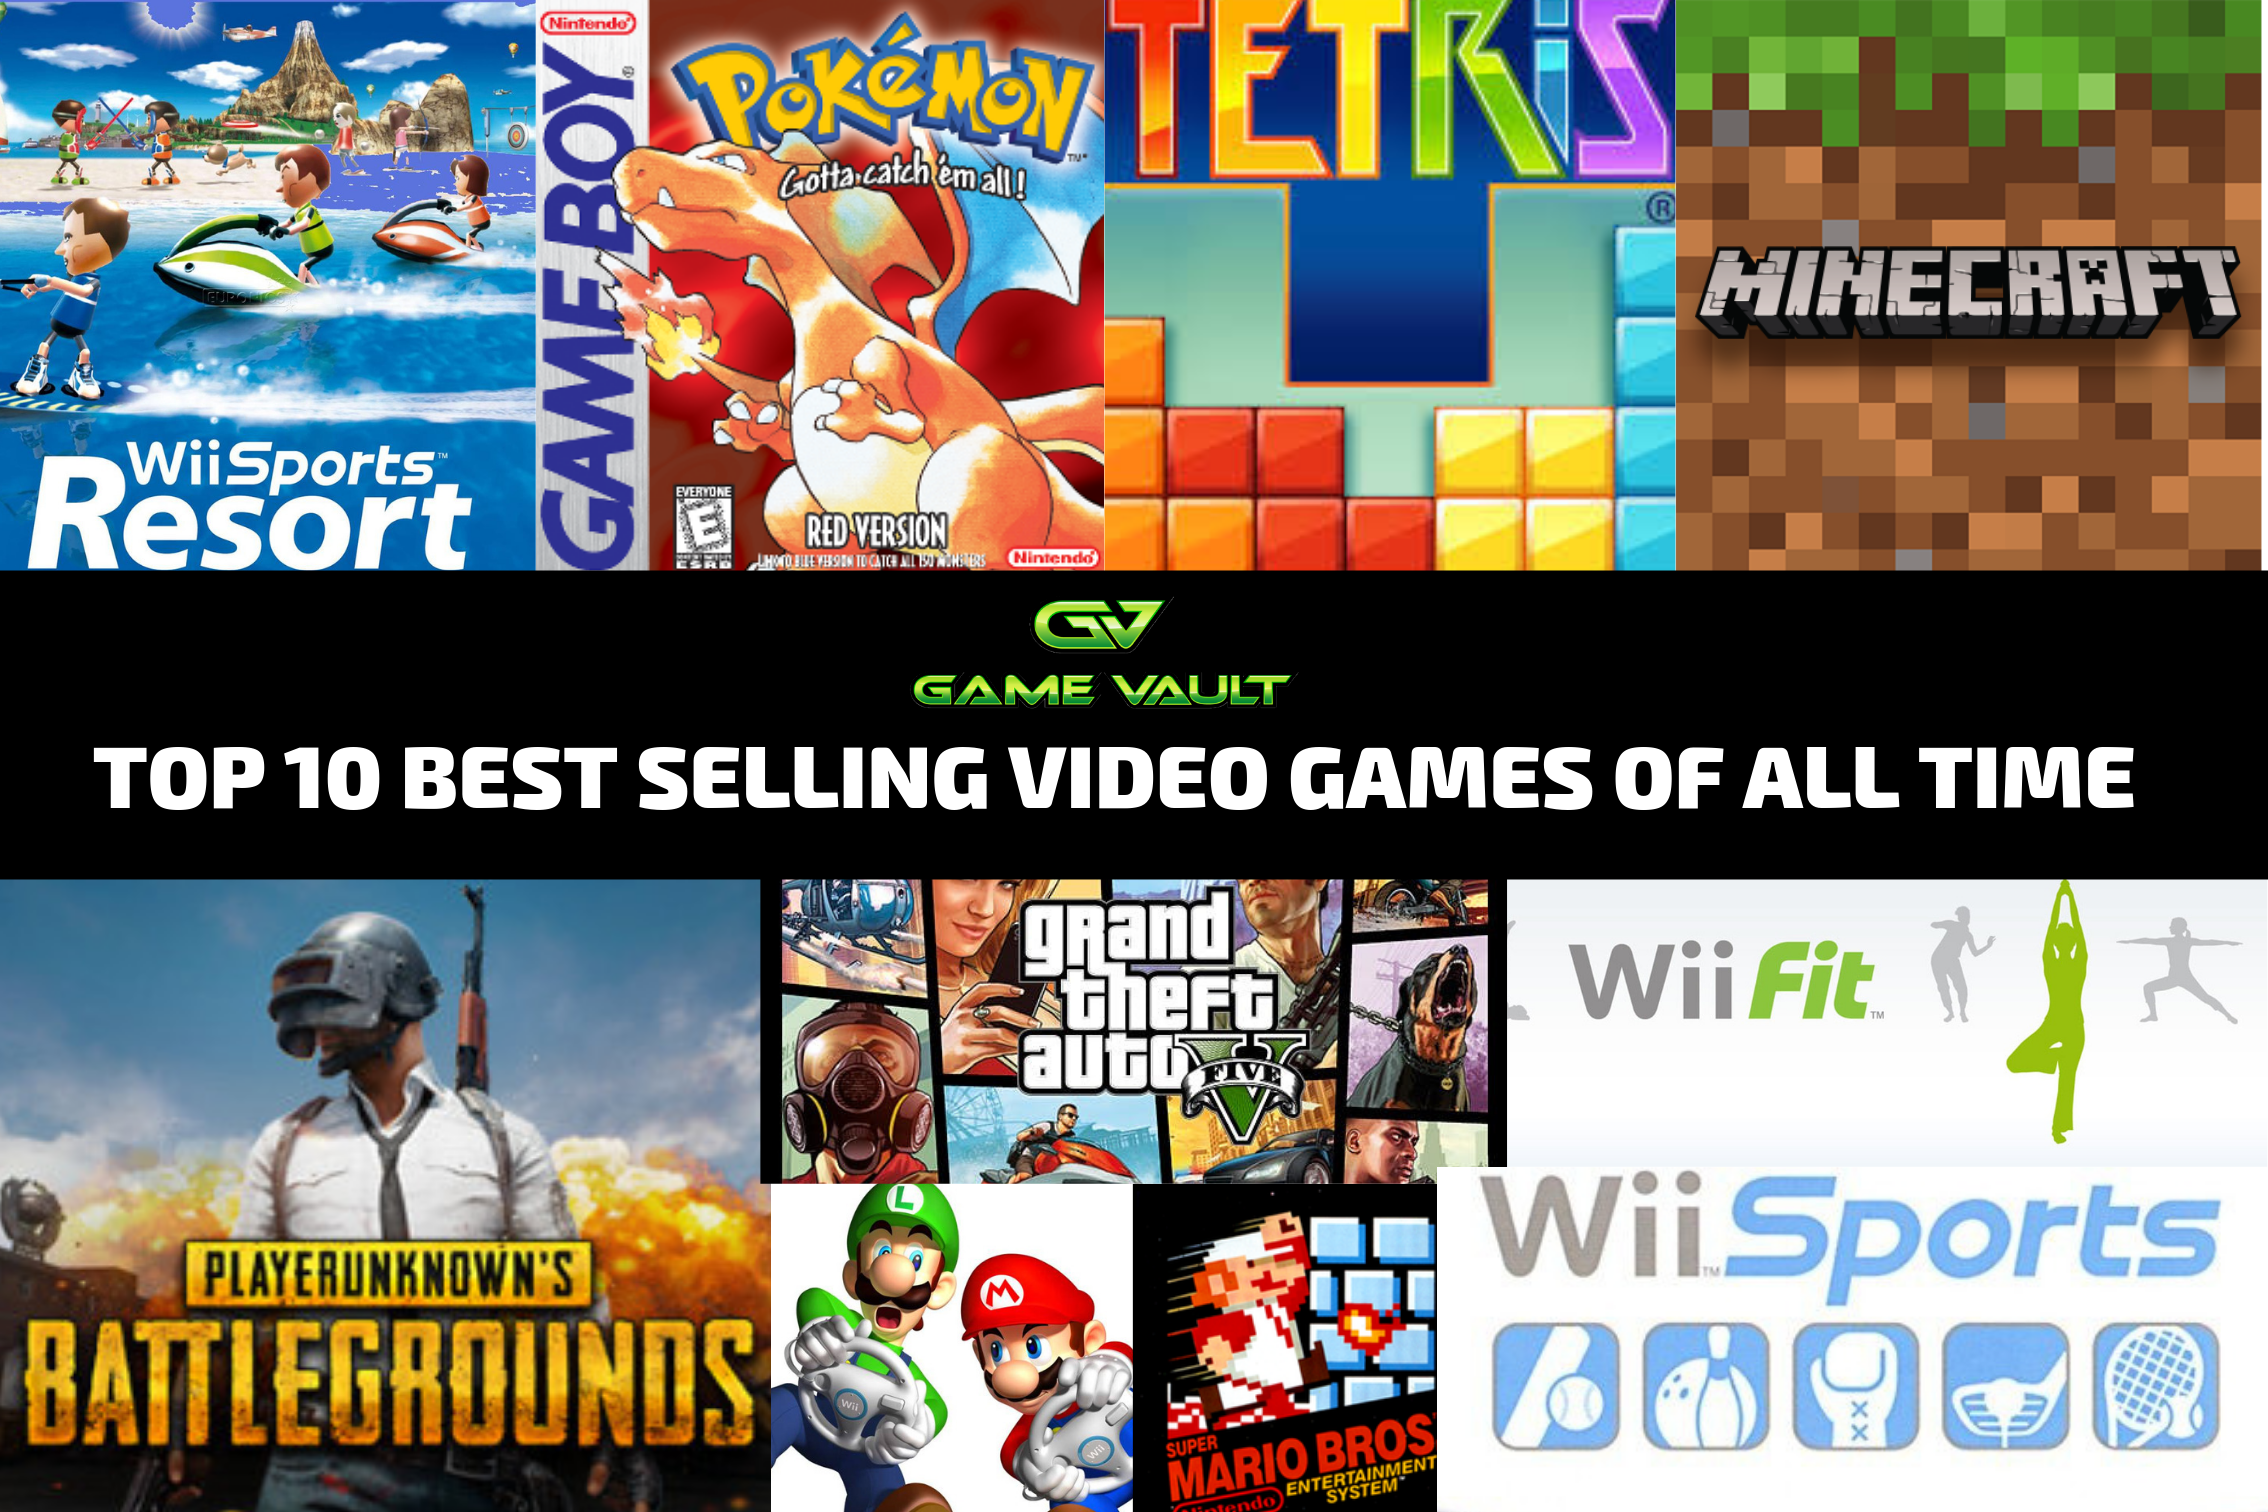 Top 10 Best-Selling Video Games of All Time